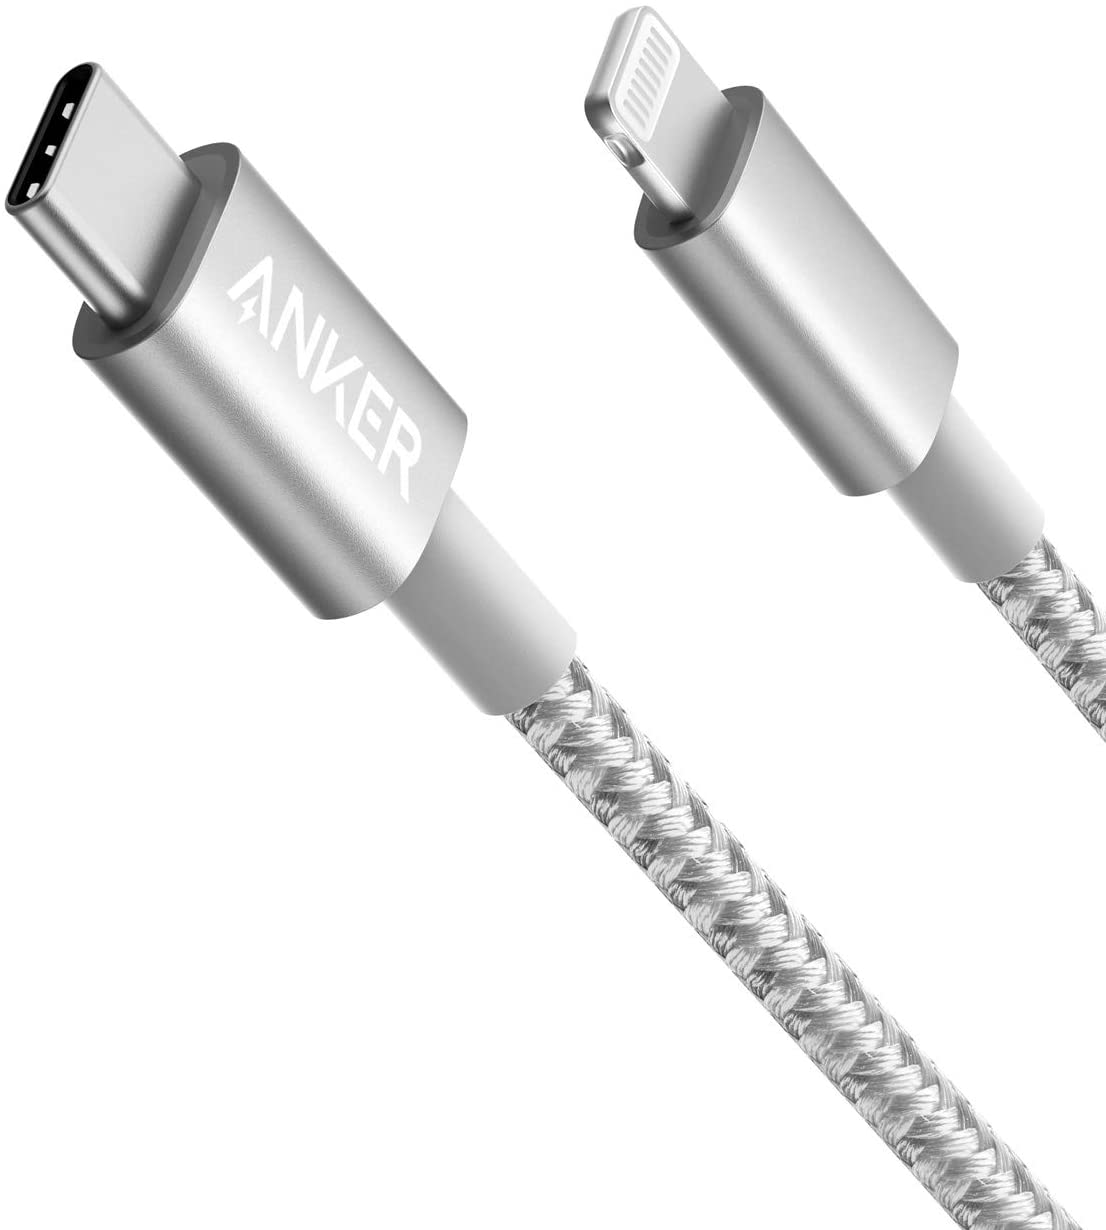 Anker 331 USB-C to Lightning Cable (Silver/1ft)